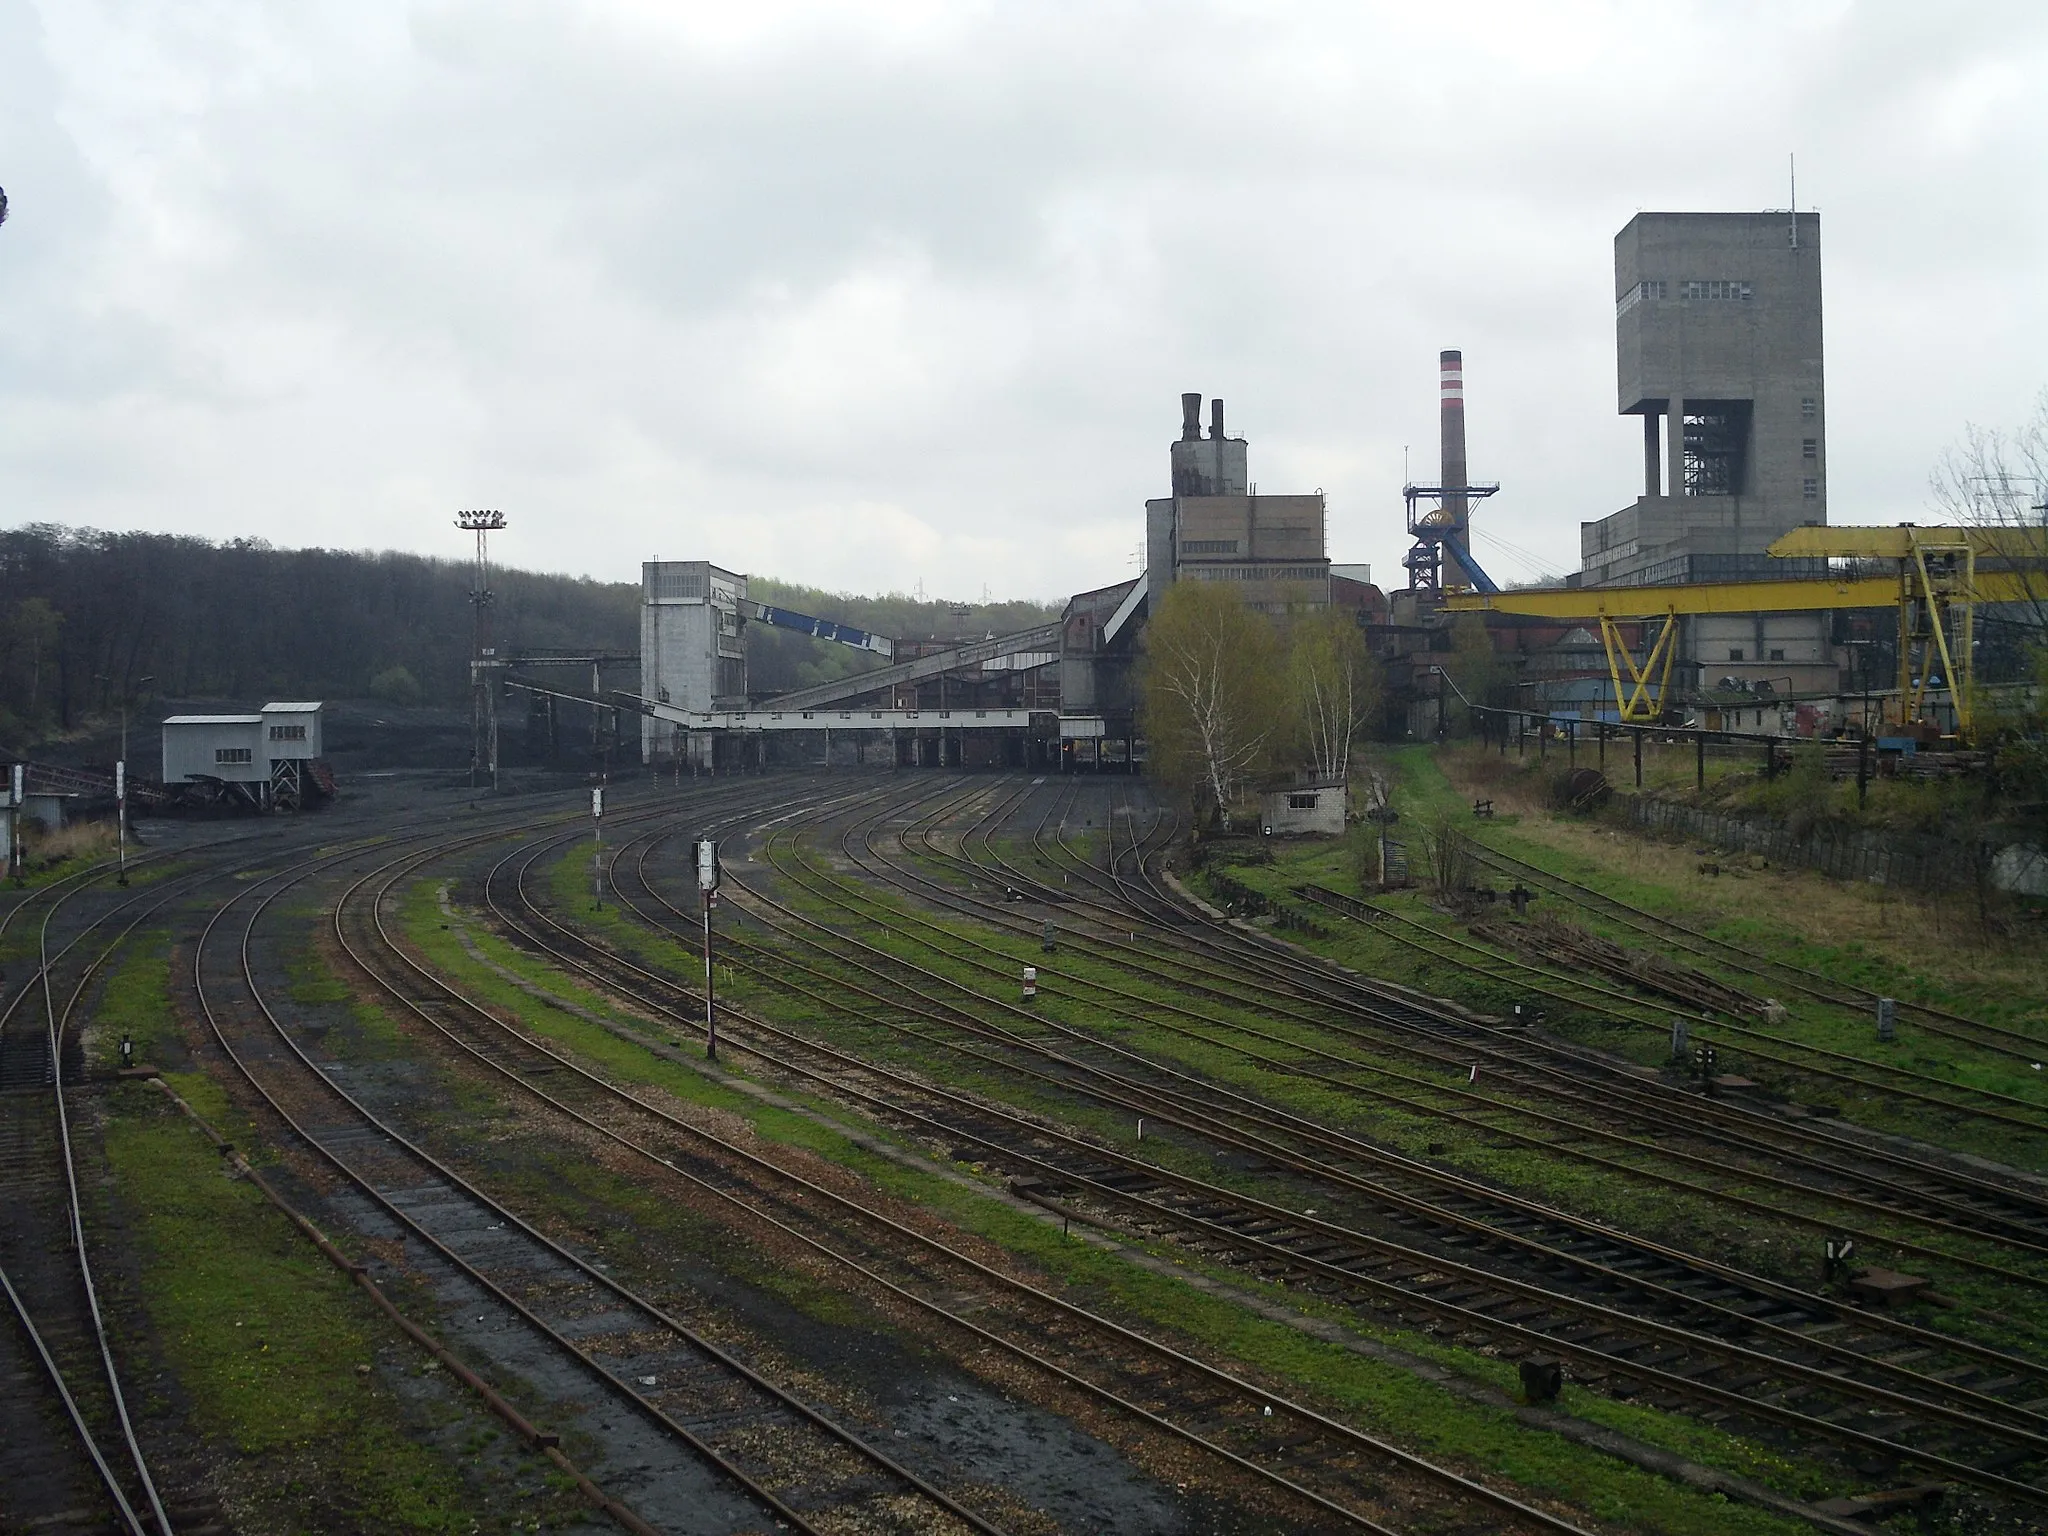 Photo showing: Business tracks of Anna Coal Mine in Pszów, Poland, shortly after closing the mine that ended regular traffic.